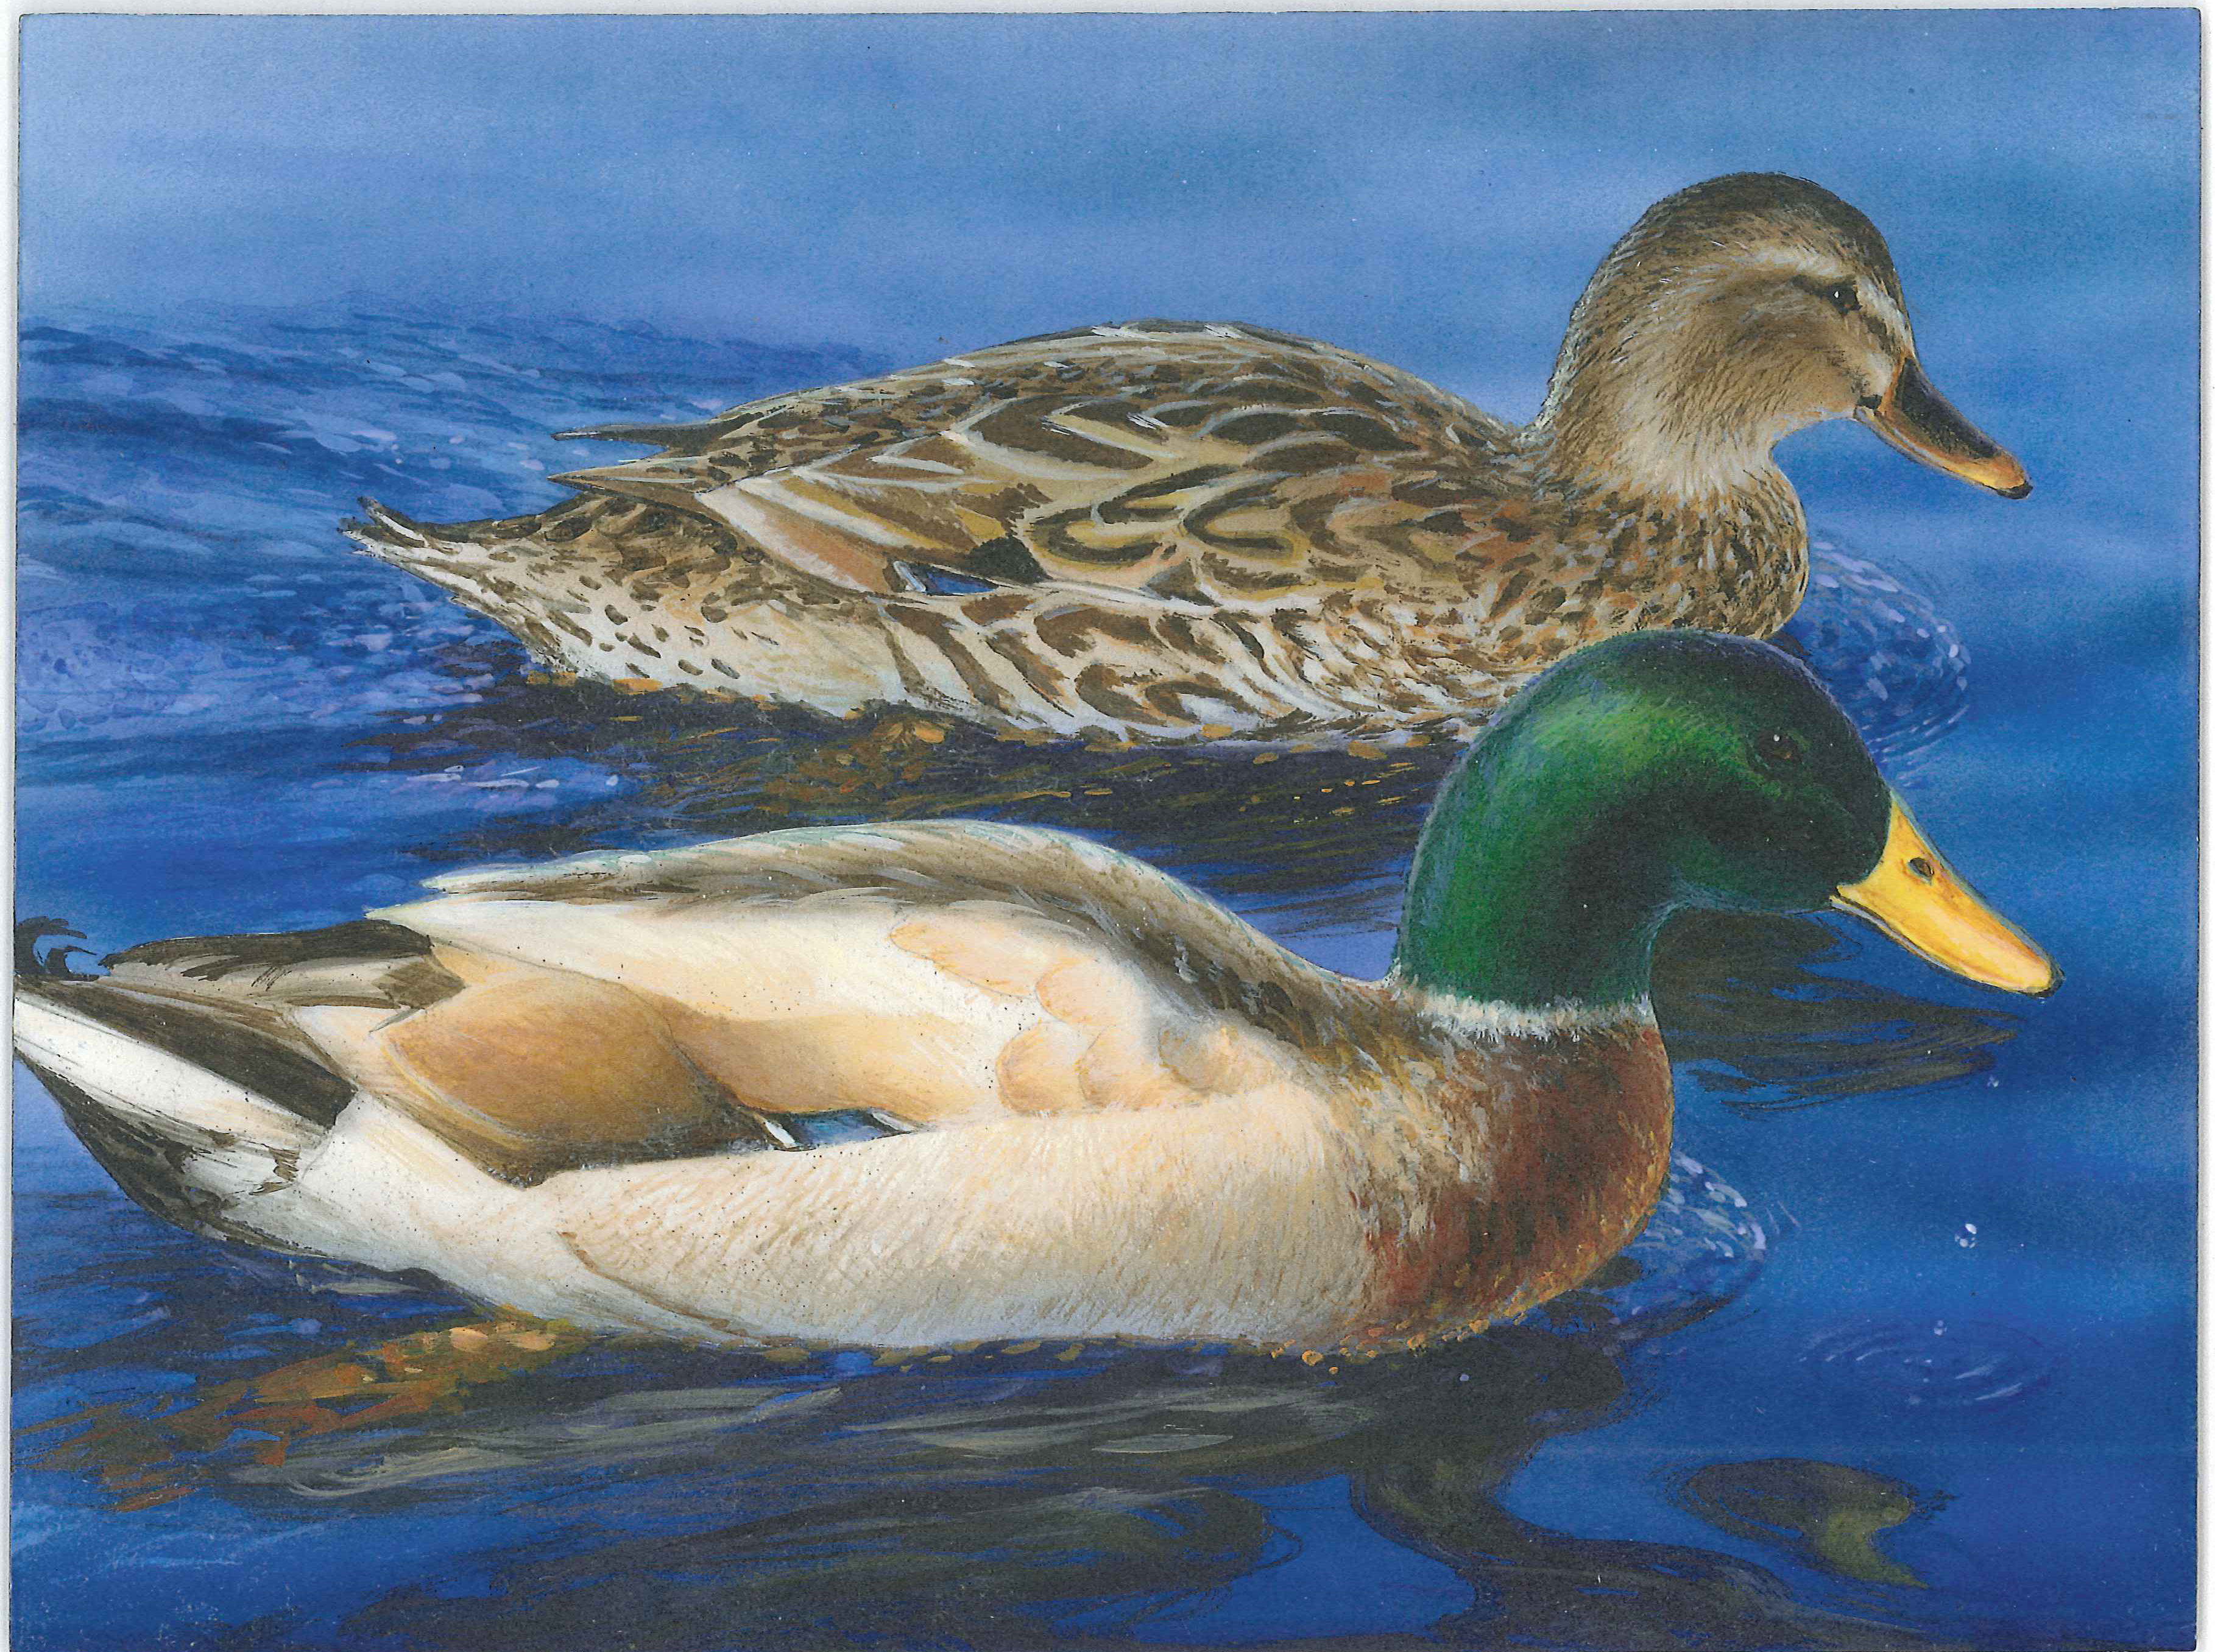 The finalist from Missouri for the 2011 Junior Duck Stamp Art Contest. (5597875971)